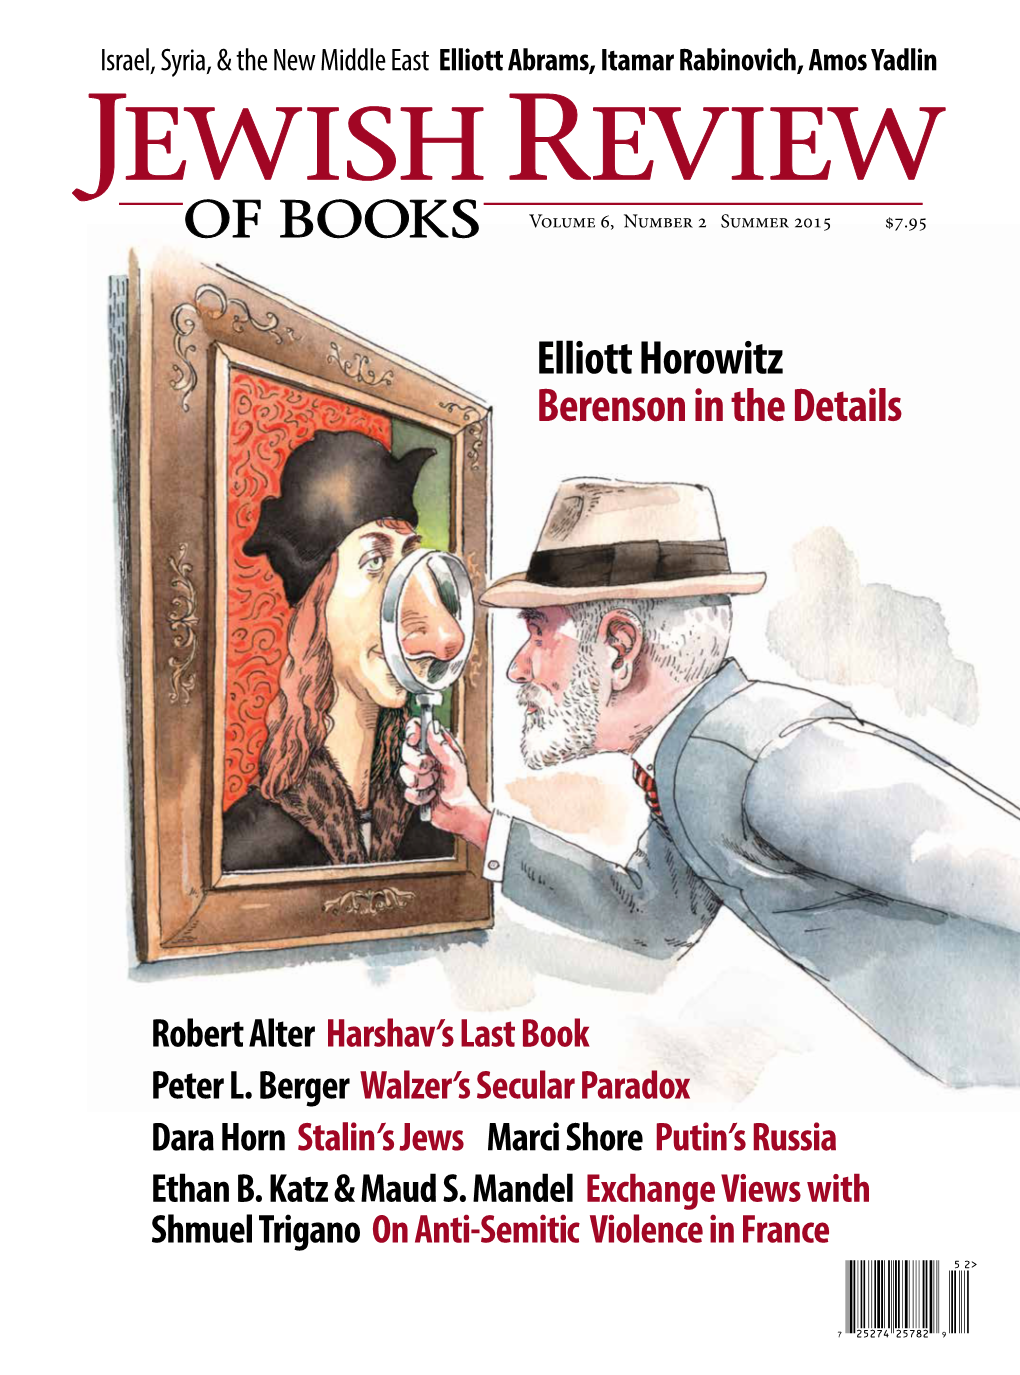 JEWISH REVIEW of BOOKS Volume 6, Number 2 Summer 2015 $7.95